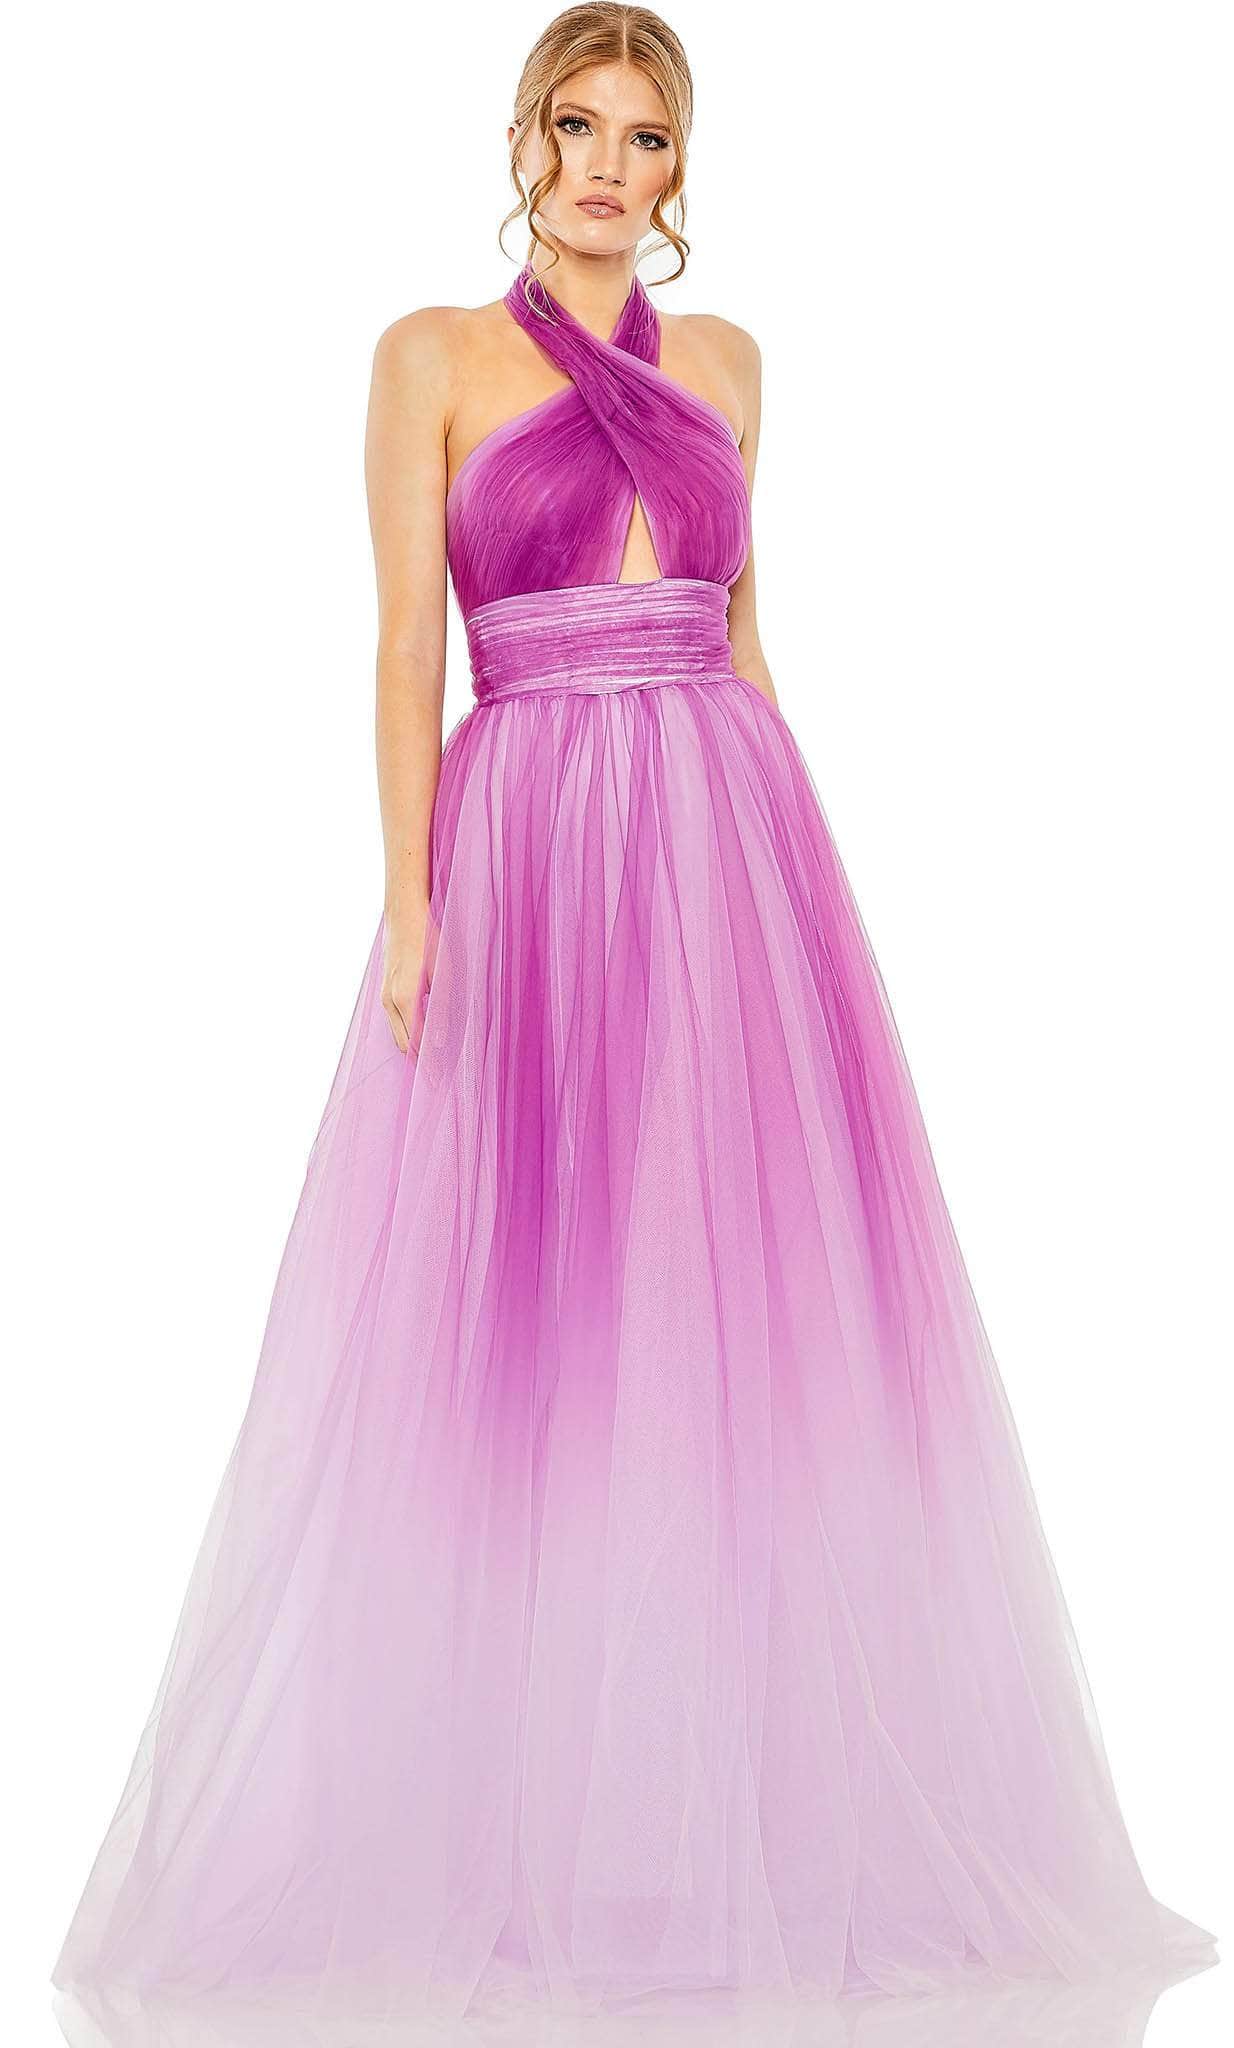 Image of Mac Duggal 20554 - Ruched Halter Neck Classic Prom Gown